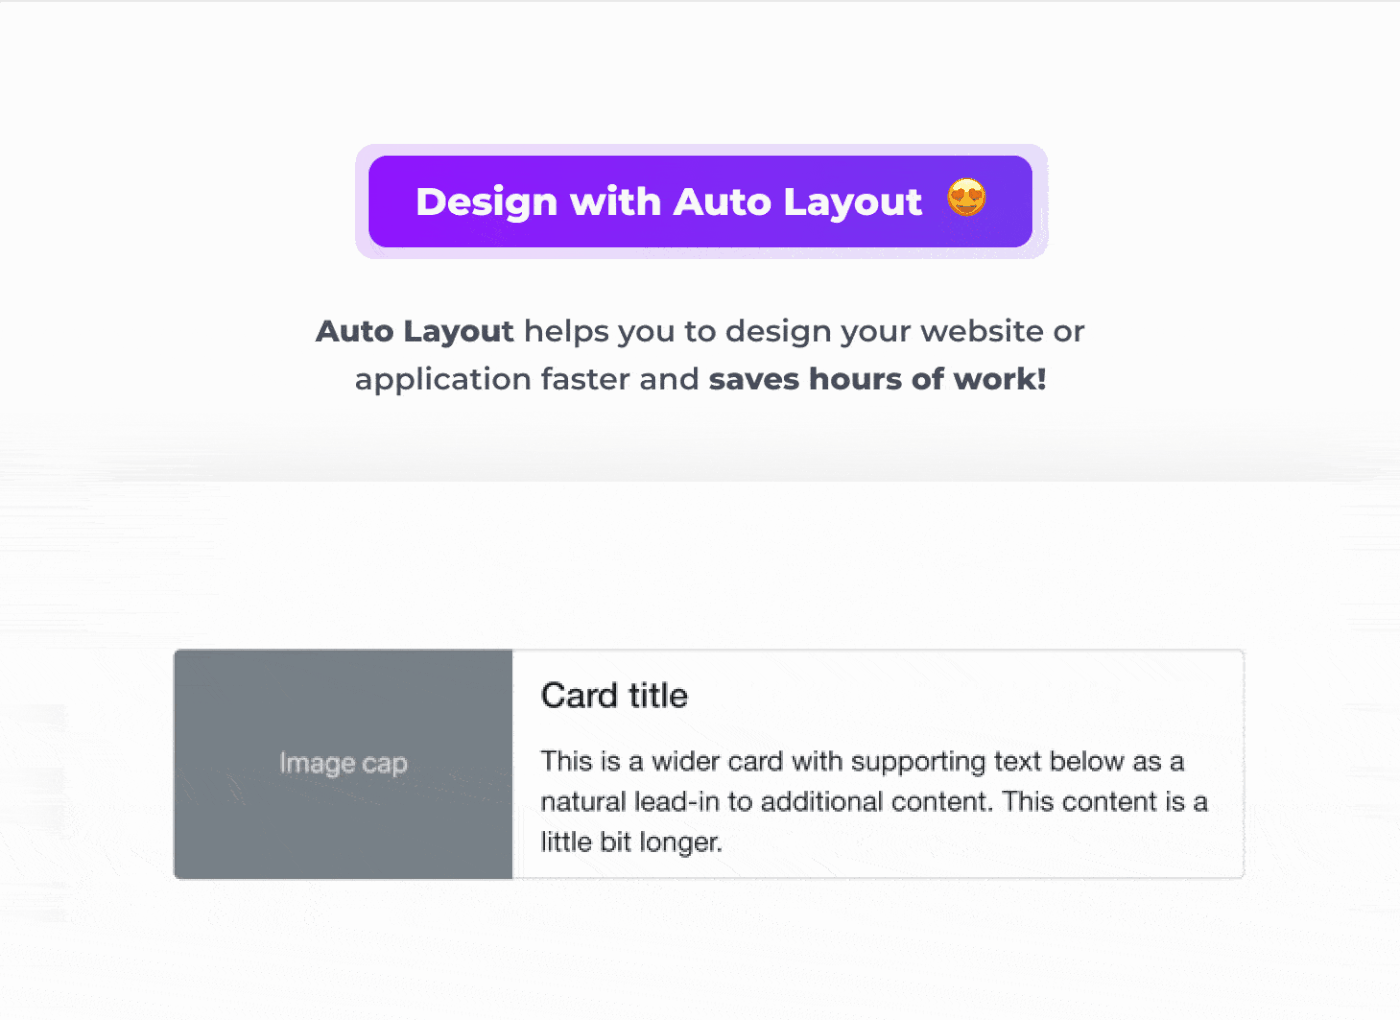 Atomic design system atoms Auto layout bootstrap bootstrap 5 components Effortless Resizing Figma free uikit